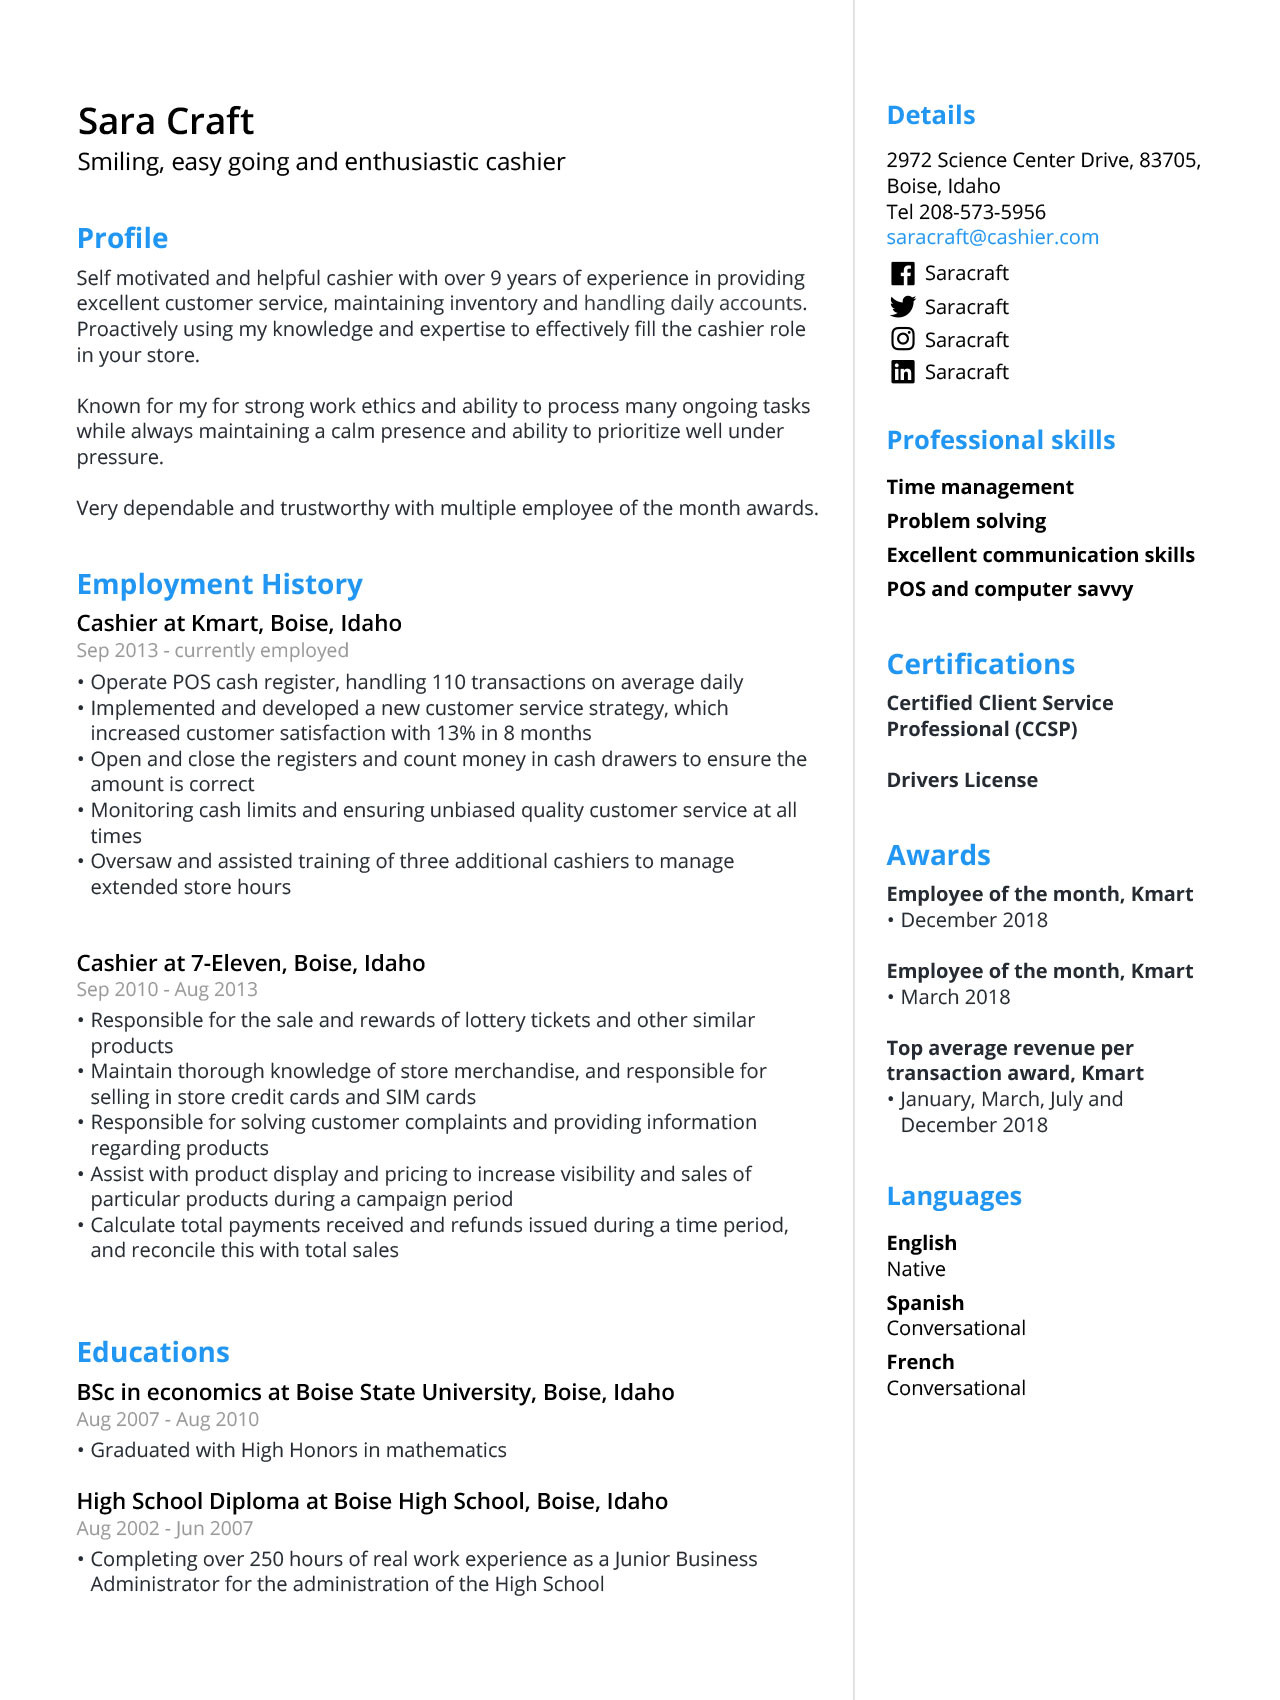 Professional Summary Resume Sample for Cashier Cashier Resume Sample & Template [2022 Guide] – Jofibo